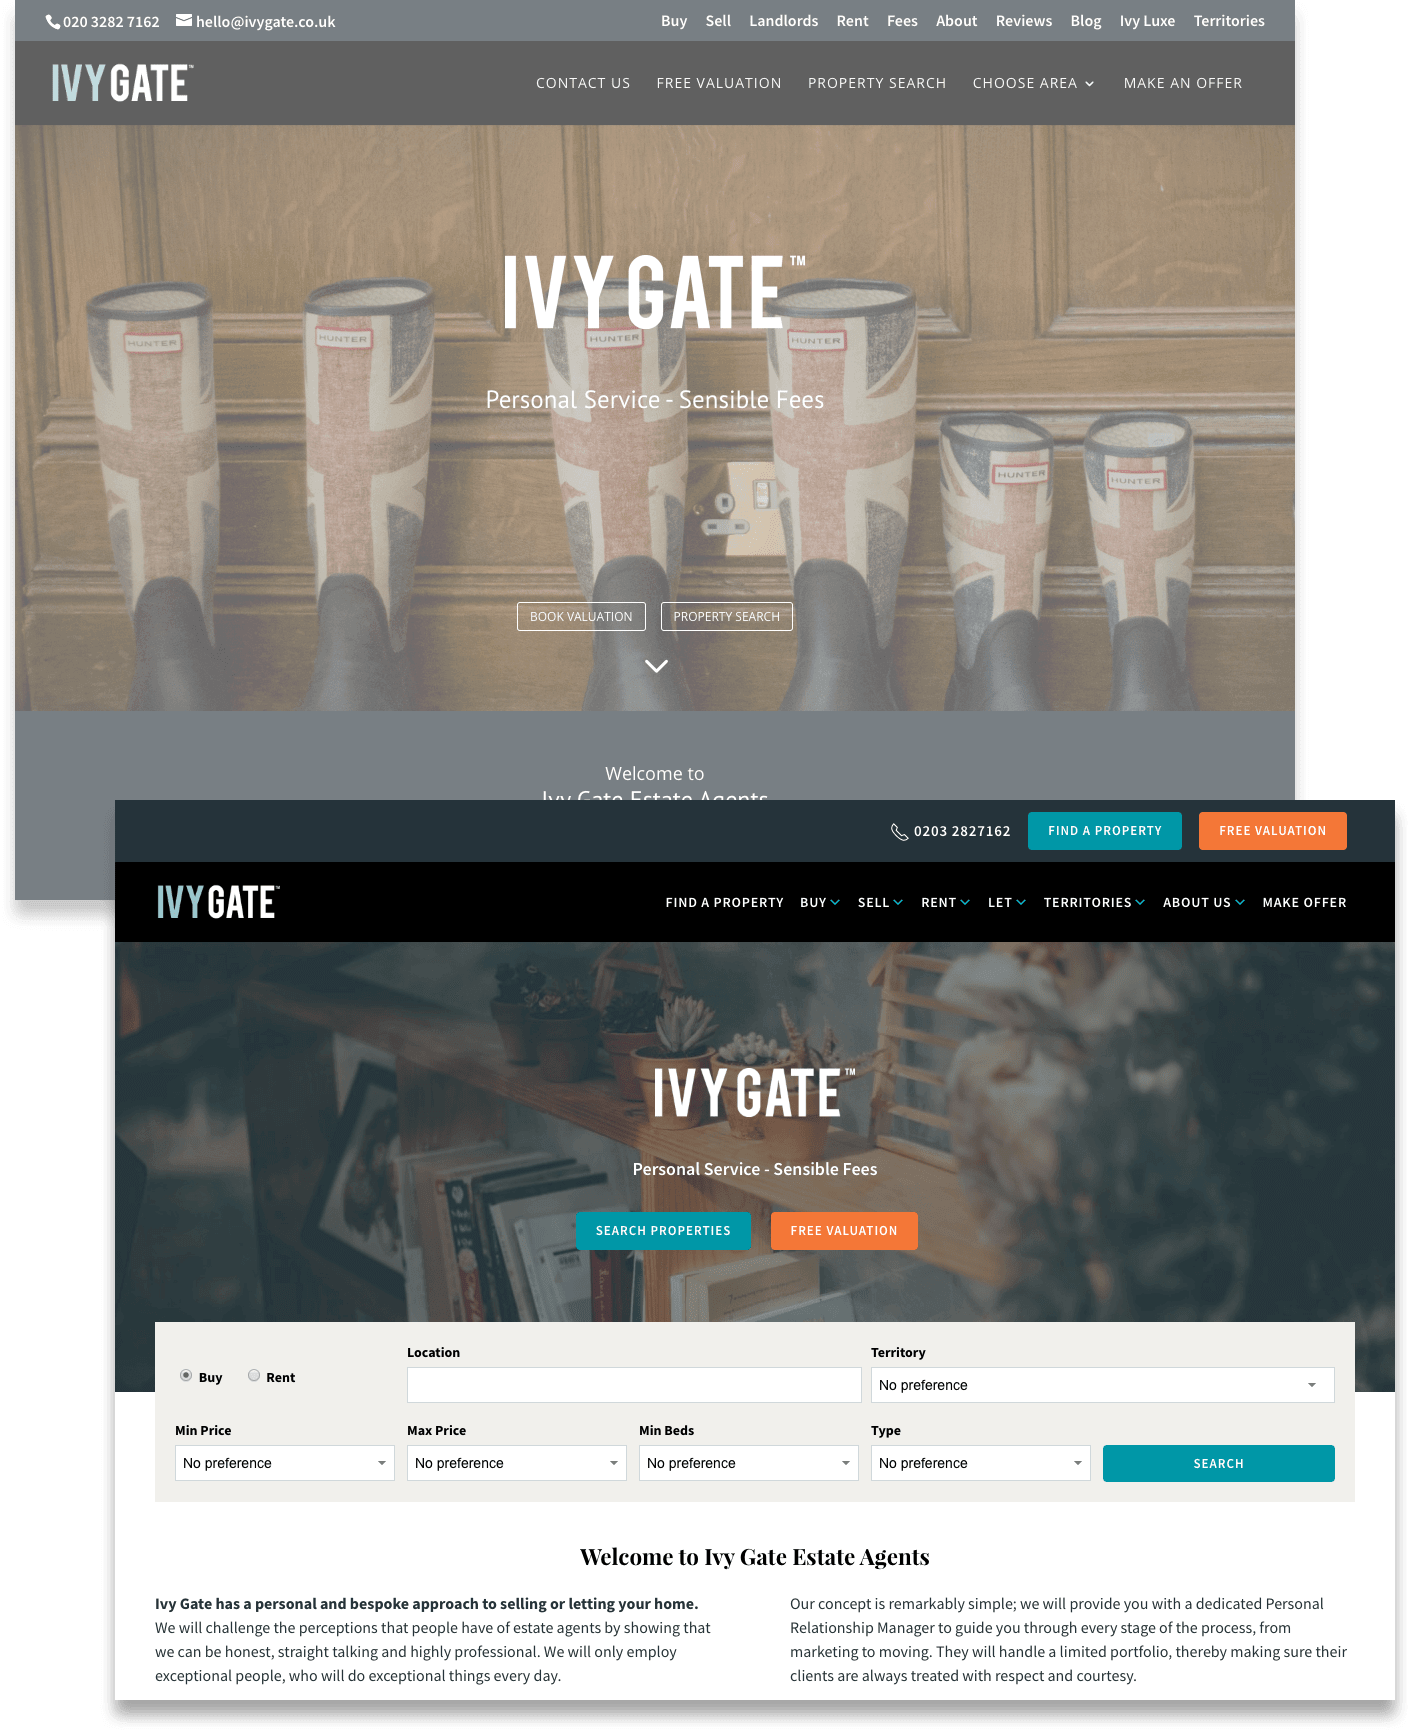 Ivy Gate homepage UI design - before and after comparison